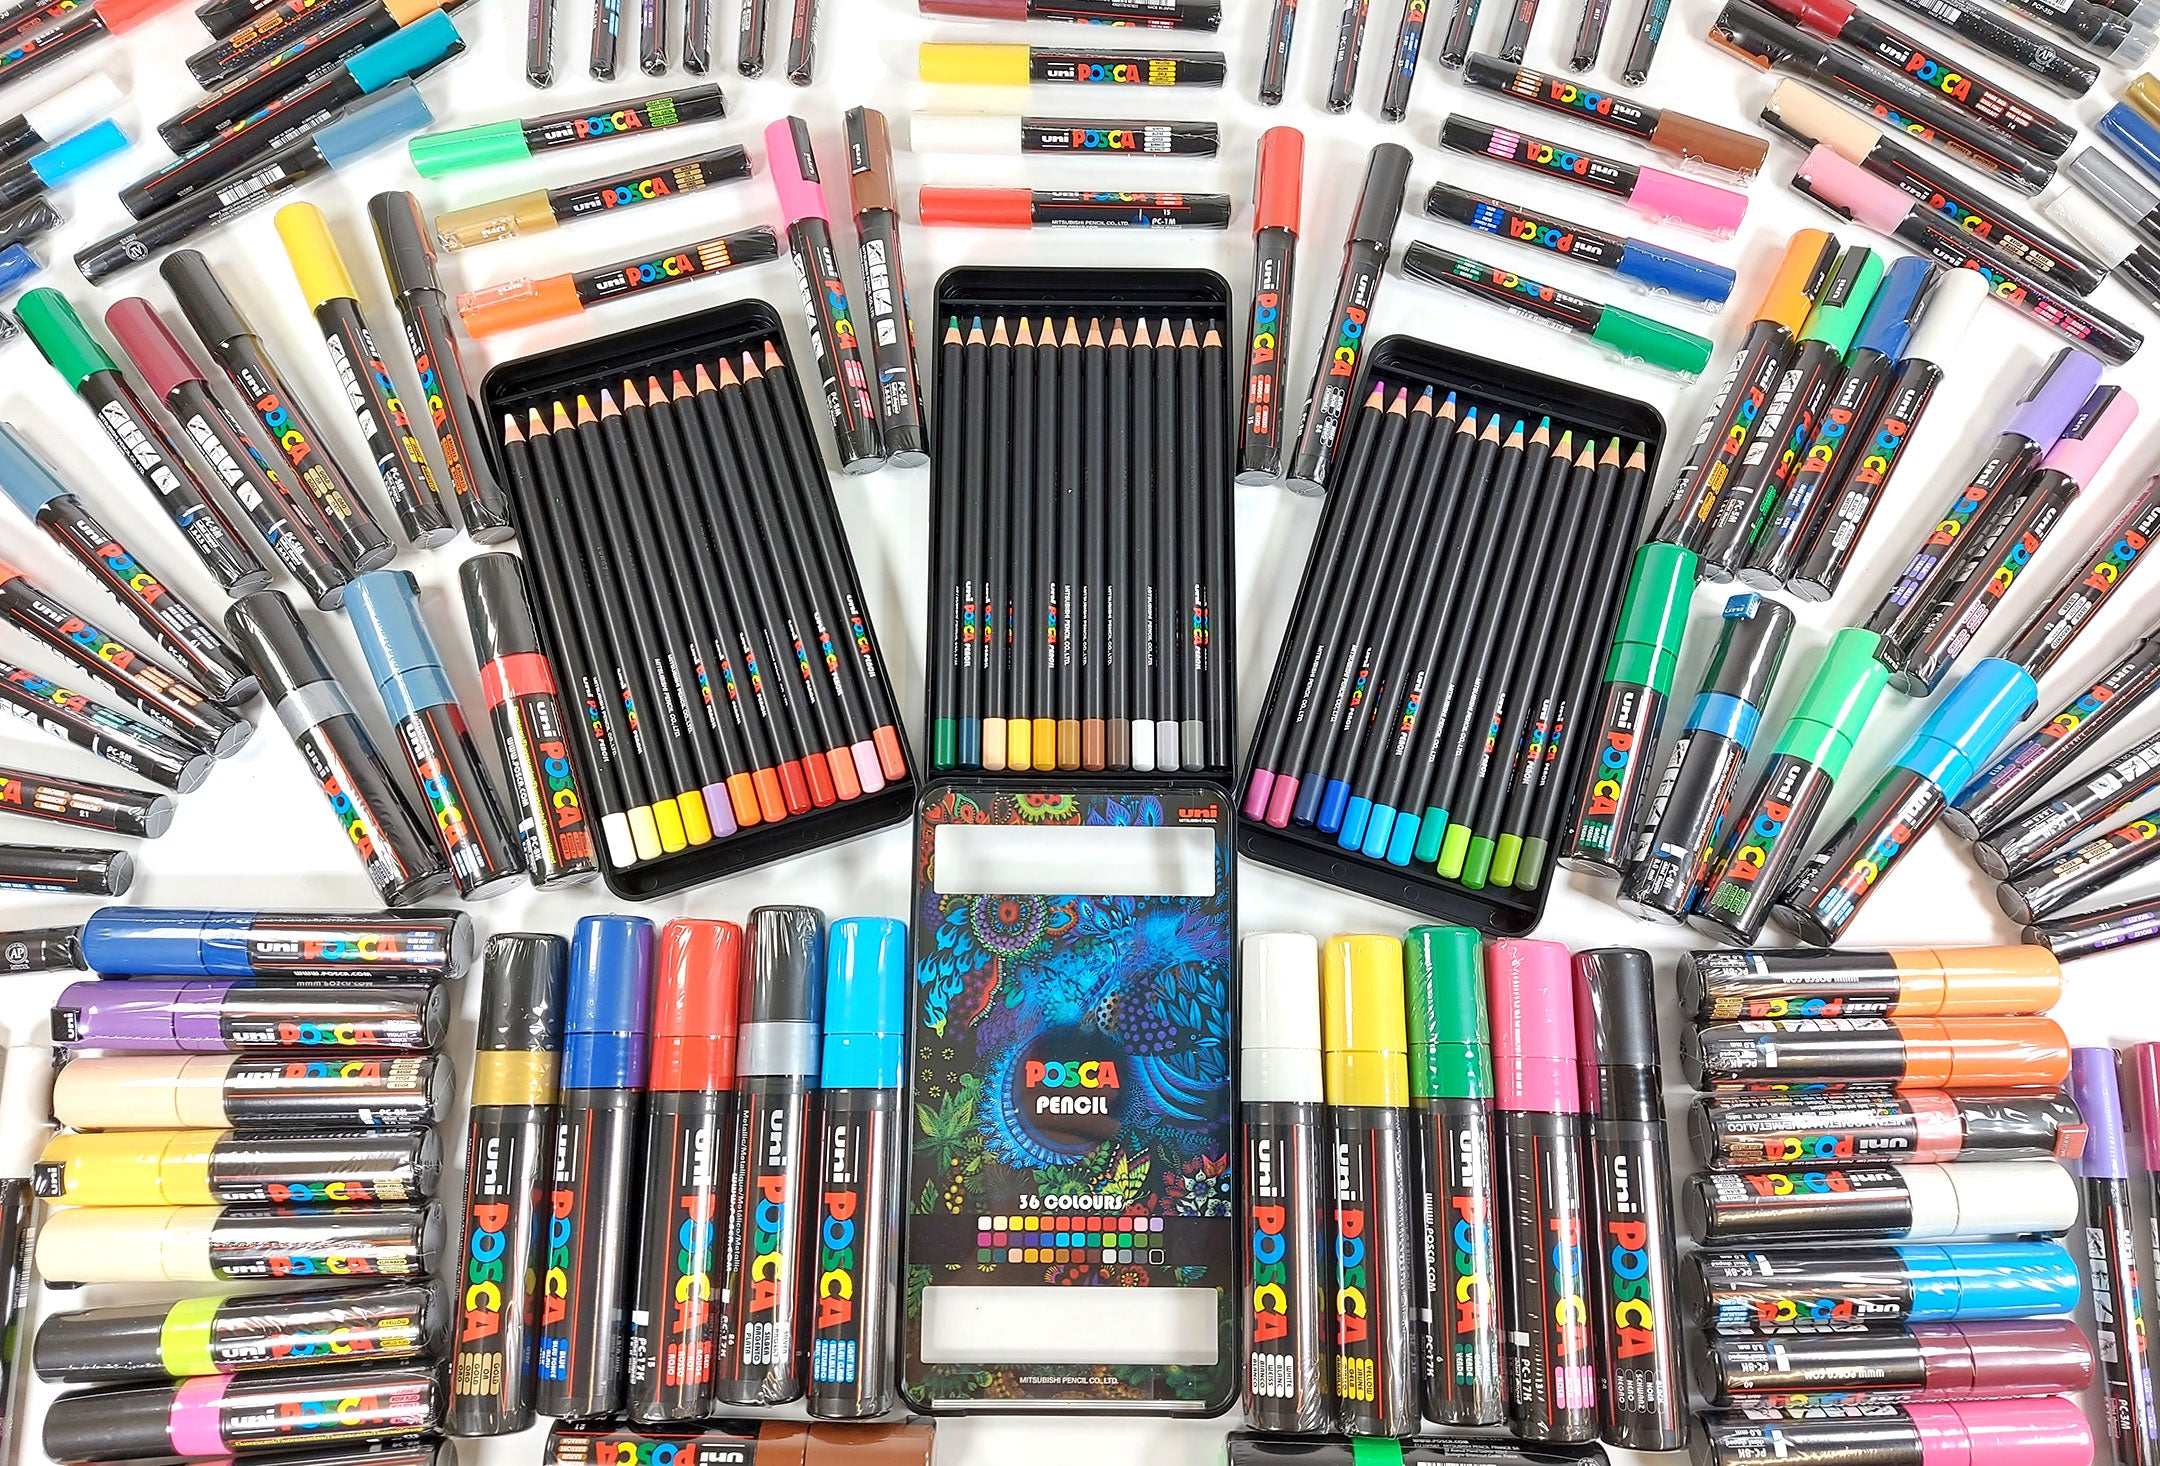 What are POSCA pens?